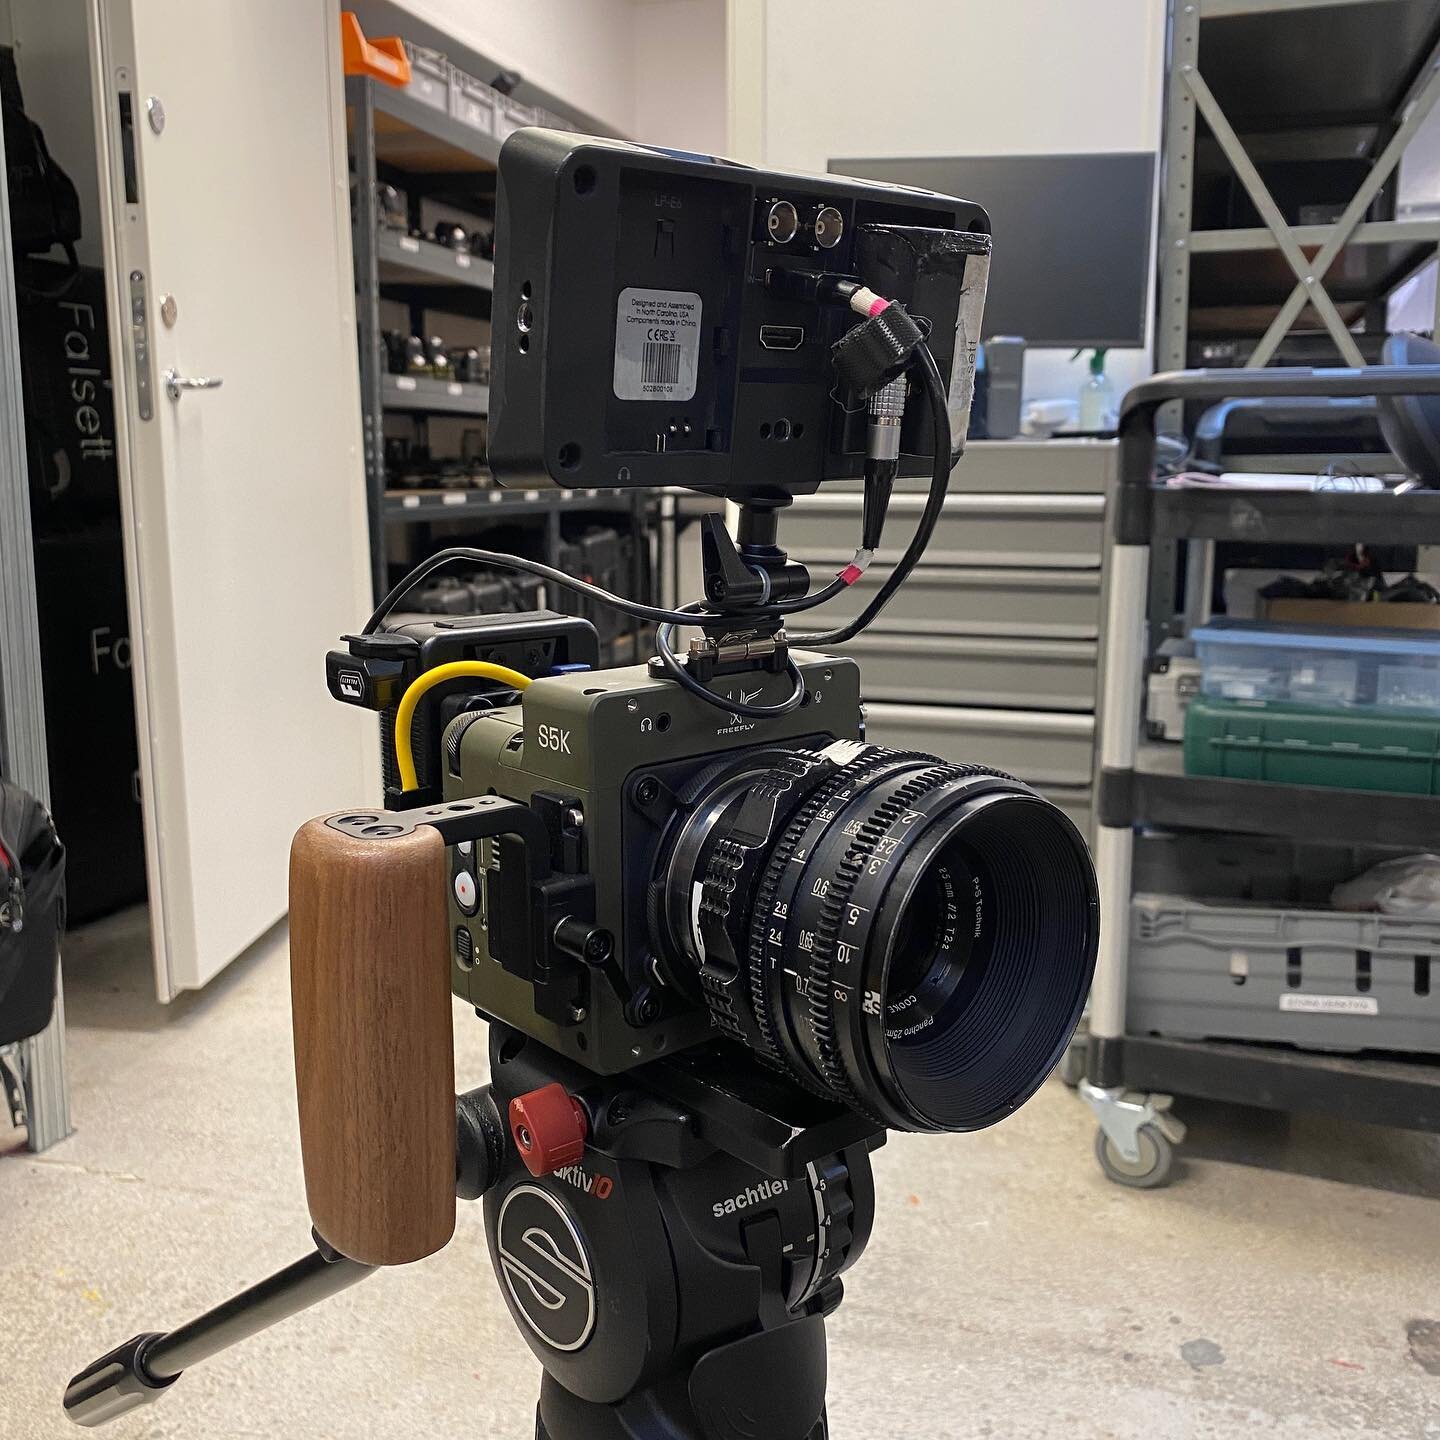 Fresh and ready to go do super dope slow-mo stuff. All new Freefly Ember shoots 5k up to 600fps and 4k up to 800fps. It comes with a native e-mount so it works with all our e-mount lenses as well as any EF or PL lenses with adapters. The sensor is S3